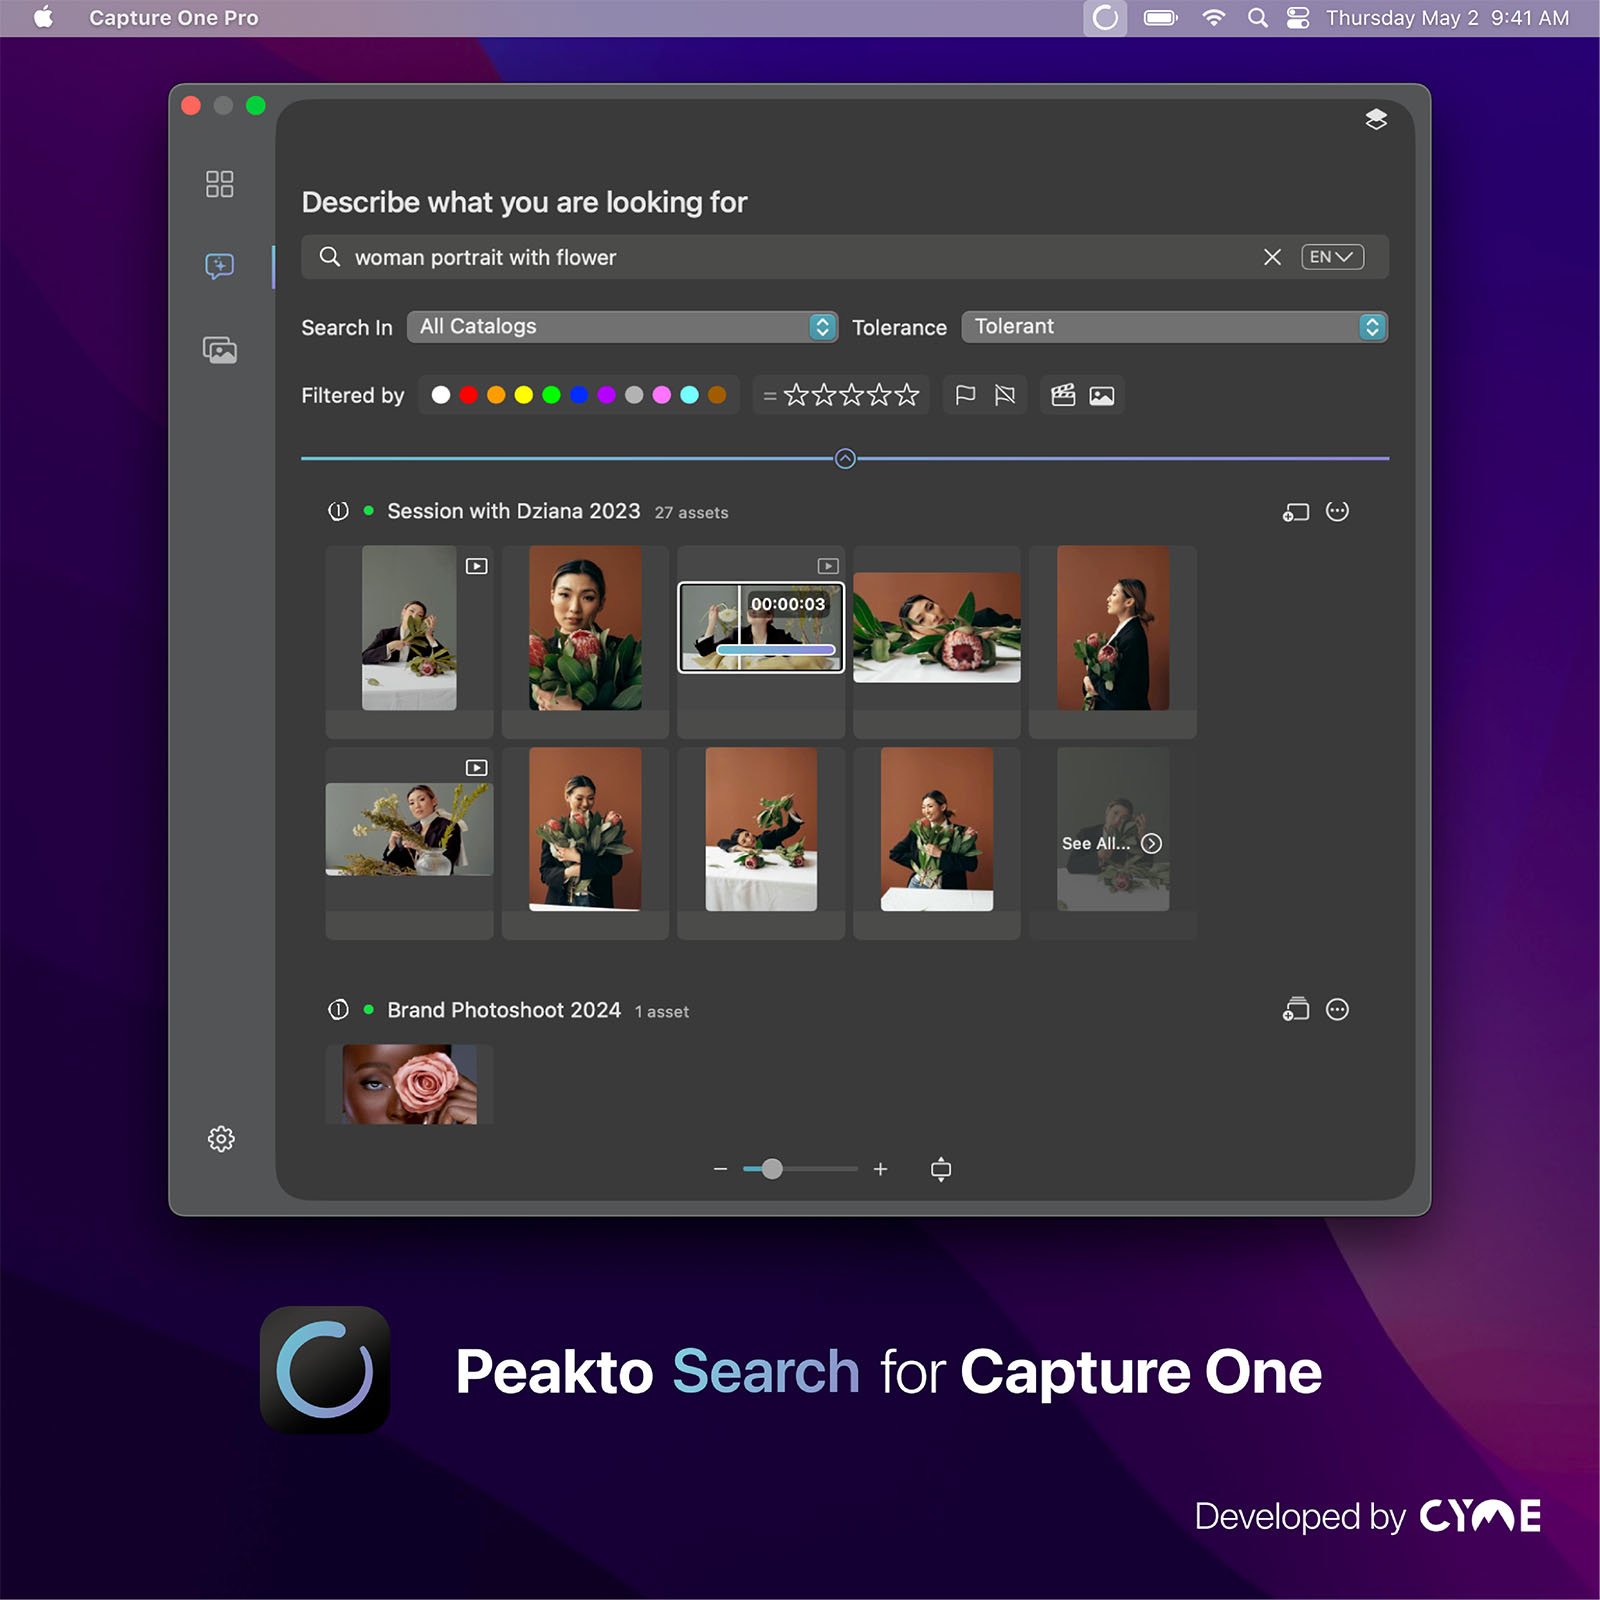 A screenshot of capture one pro interface showing a photo search screen titled "peekato search for capture one." various thumbnails of floral arrangement photos in a session are displayed.